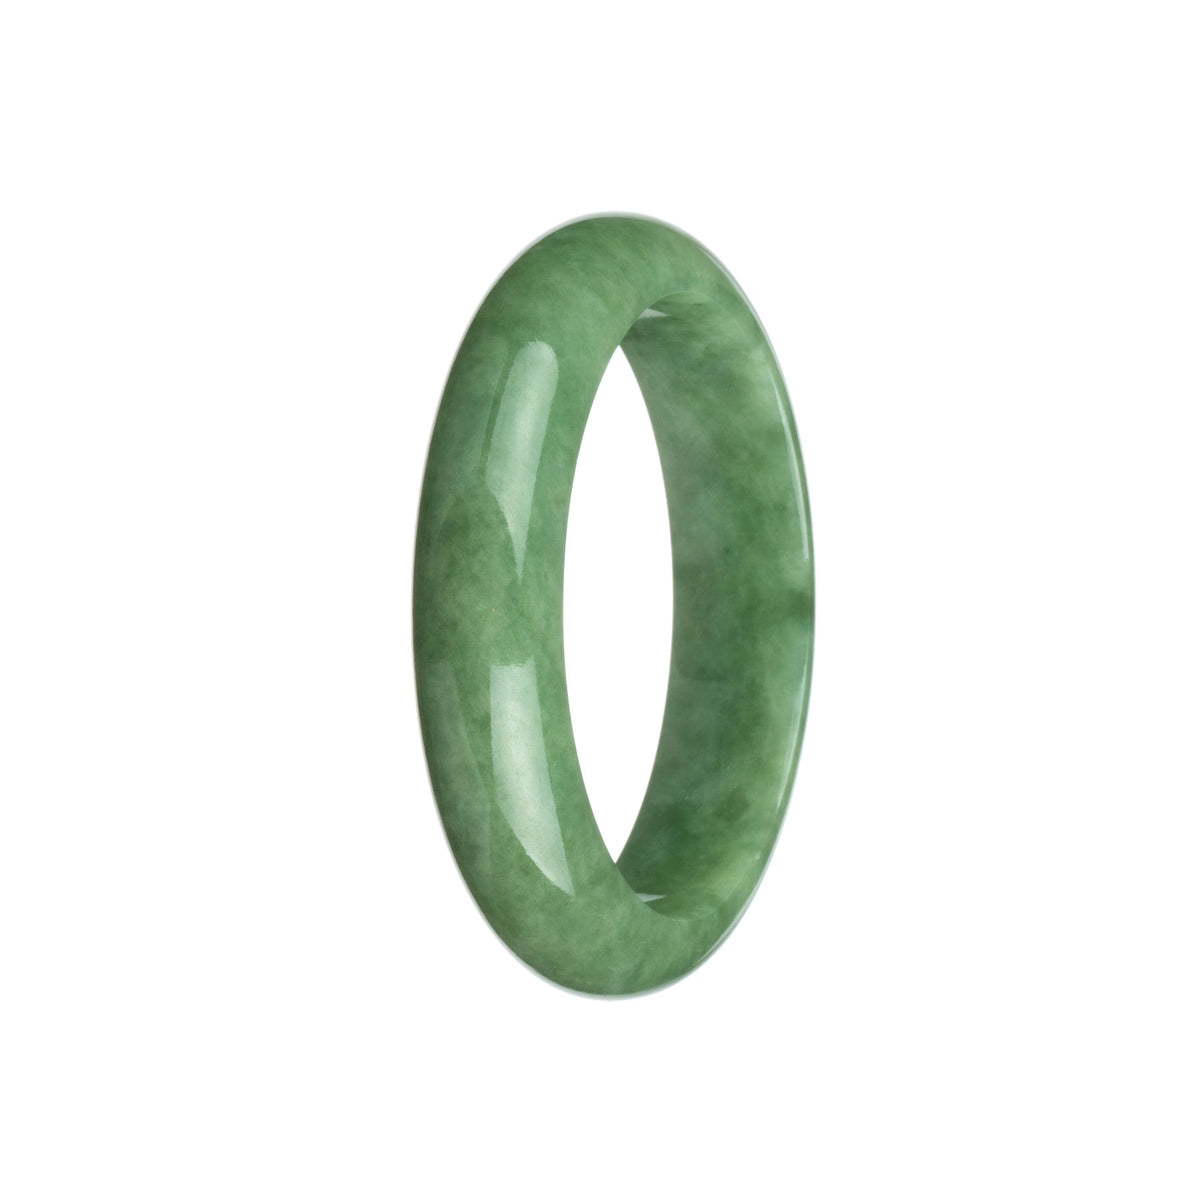 A close-up image of a round jade bangle with a half-moon shape, made from certified Grade A green jadeite jade. It has a diameter of 57mm and is crafted by MAYS™.